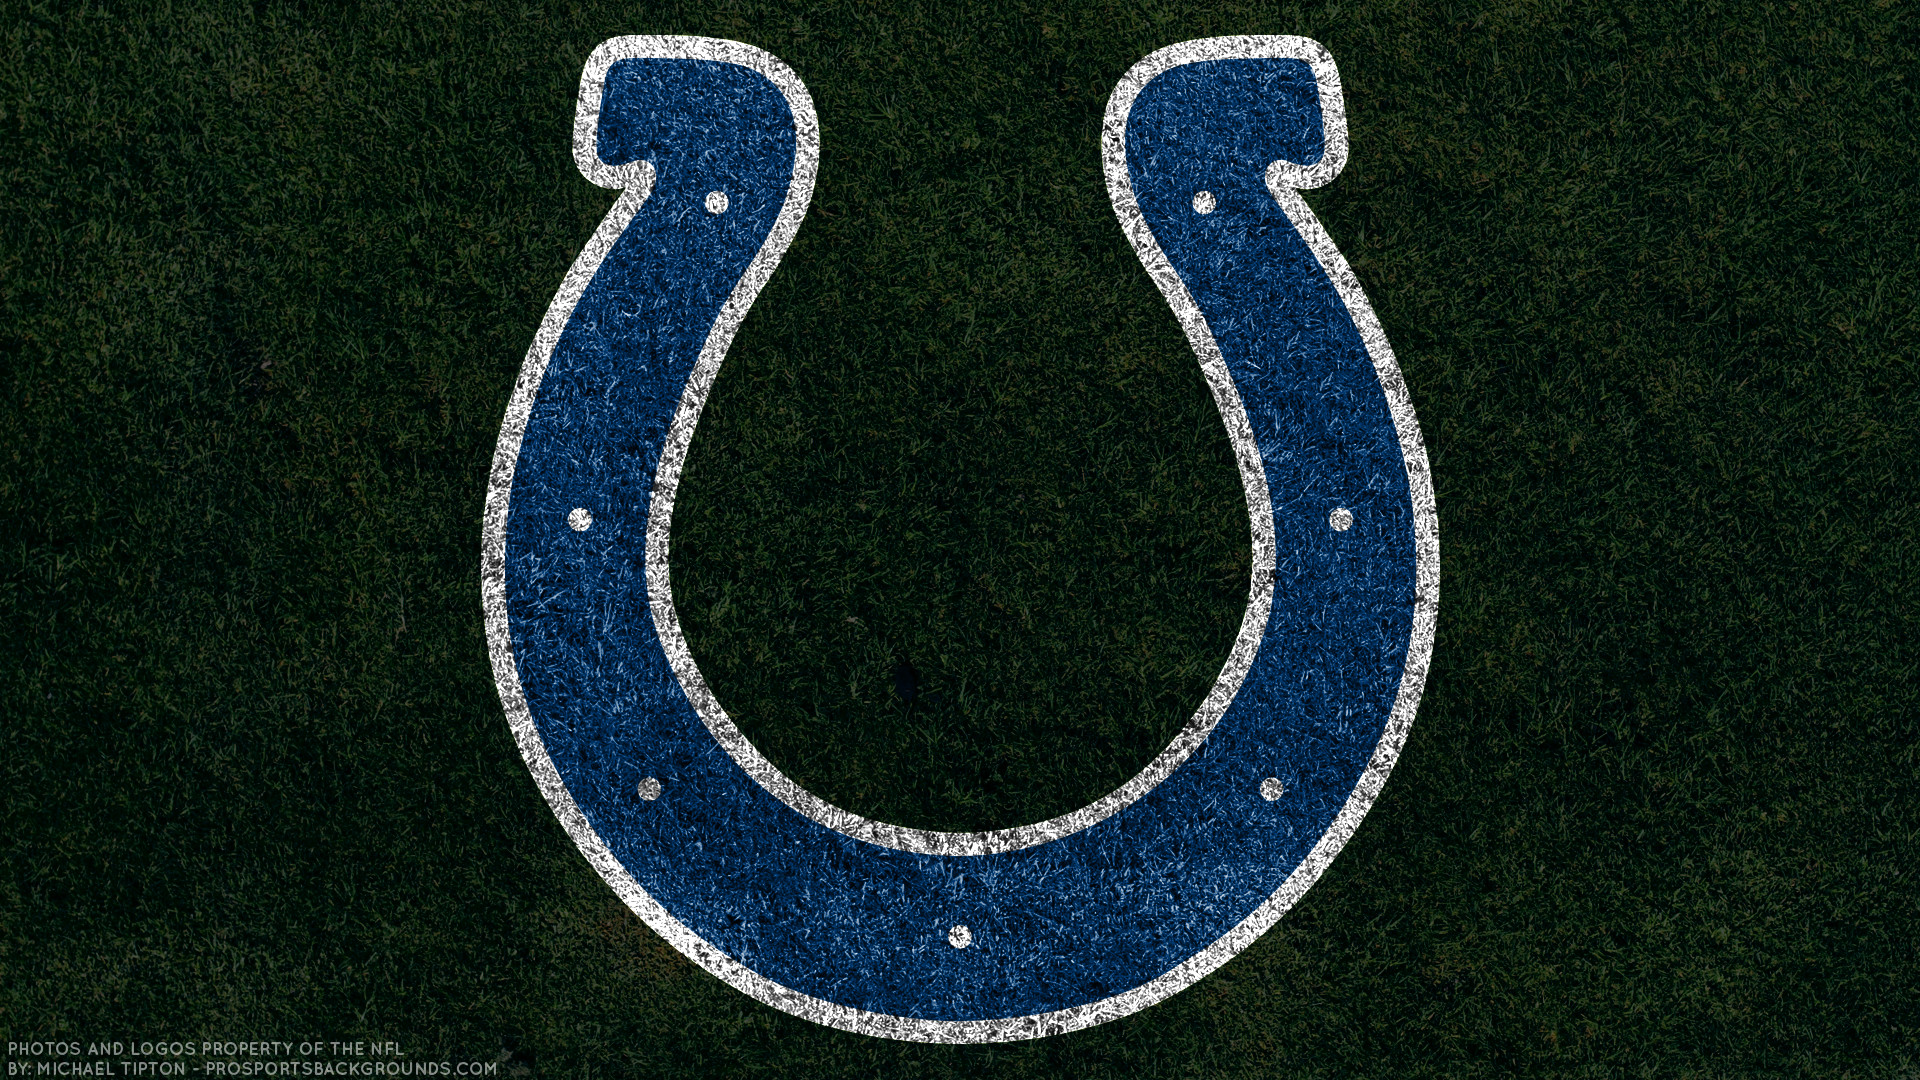 1920x1080 ... Indianapolis Colts 2018 turf logo wallpaper free for desktop pc iphone  galaxy and andriod printable screensaver